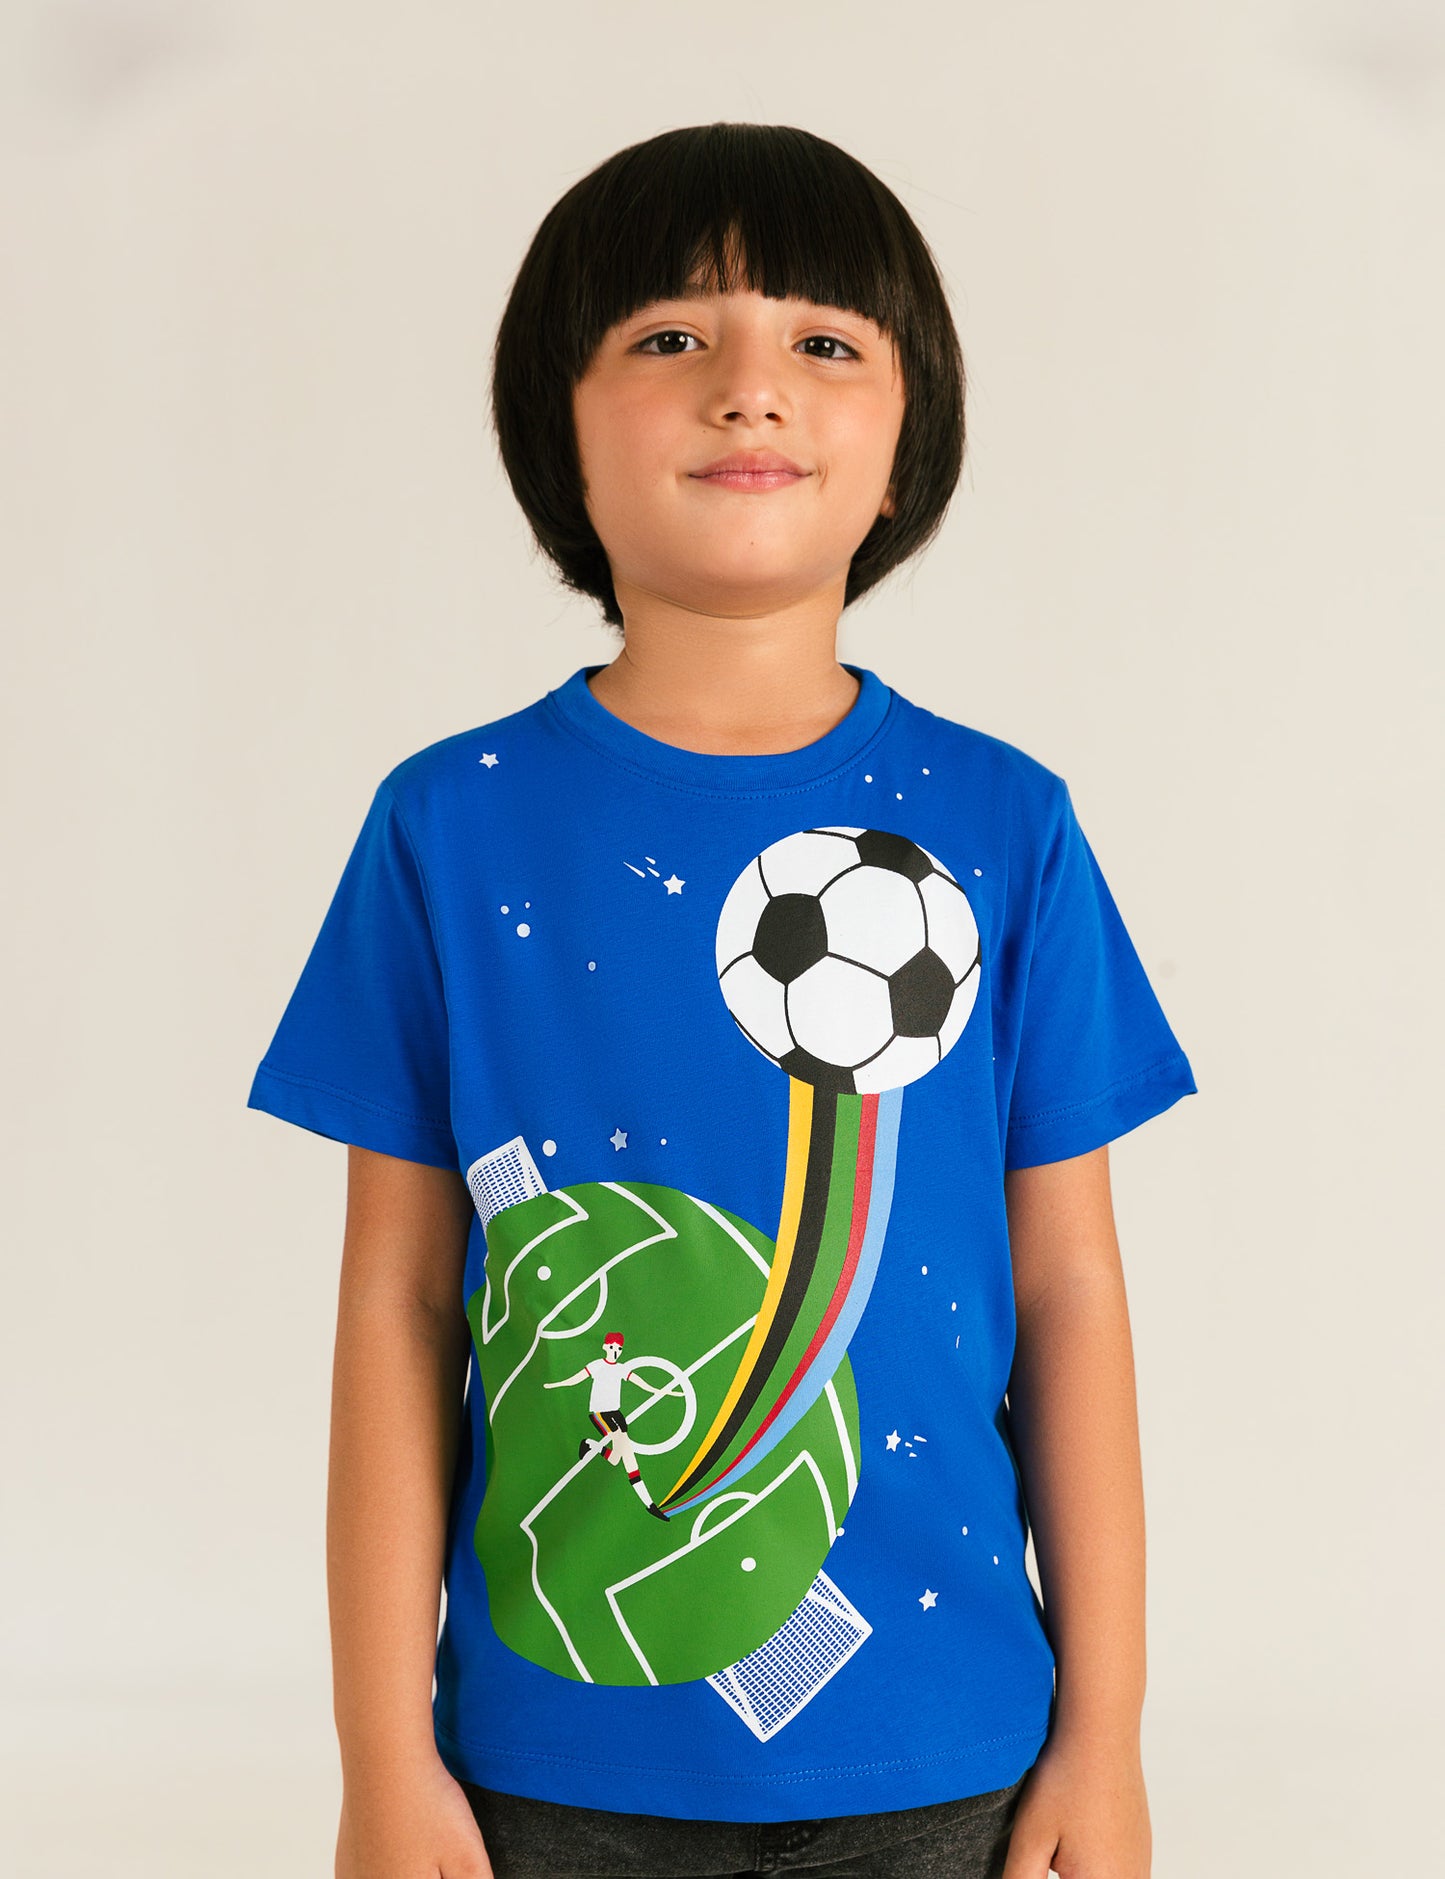 SPORTS PRINTED GRAPHIC T-SHIRT